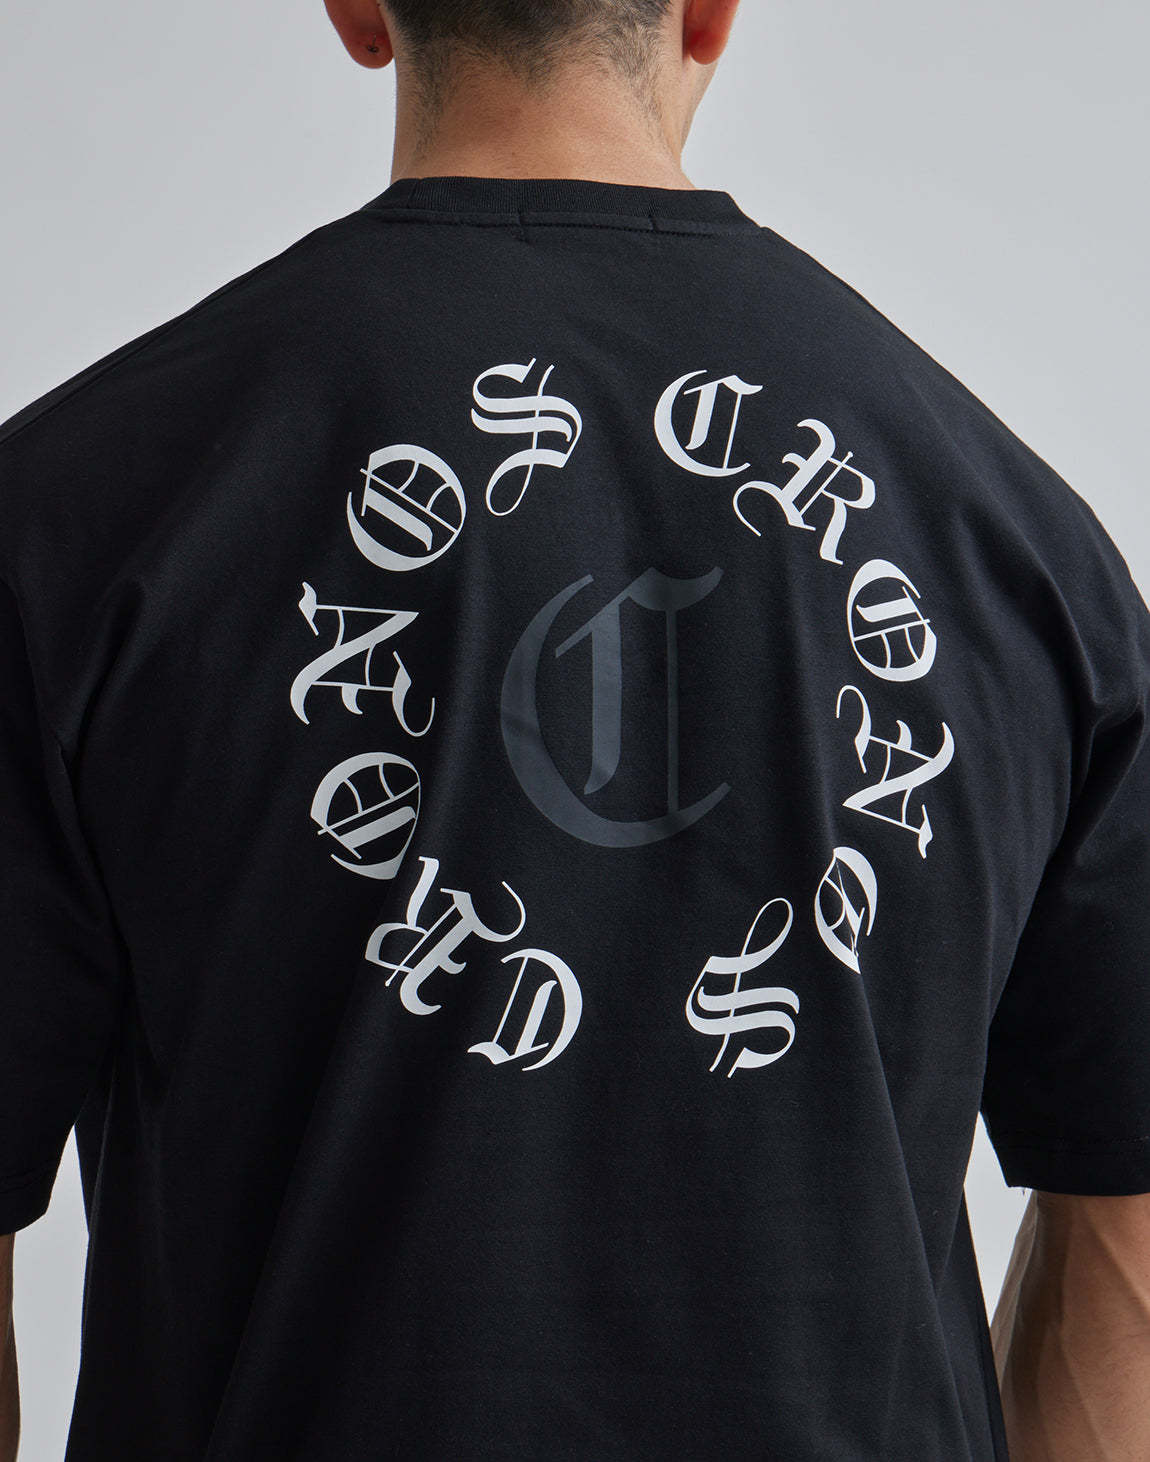 CRONOS BLACK LETTER OVERSIZE T-SHIRTS – クロノス CRONOS Official Store